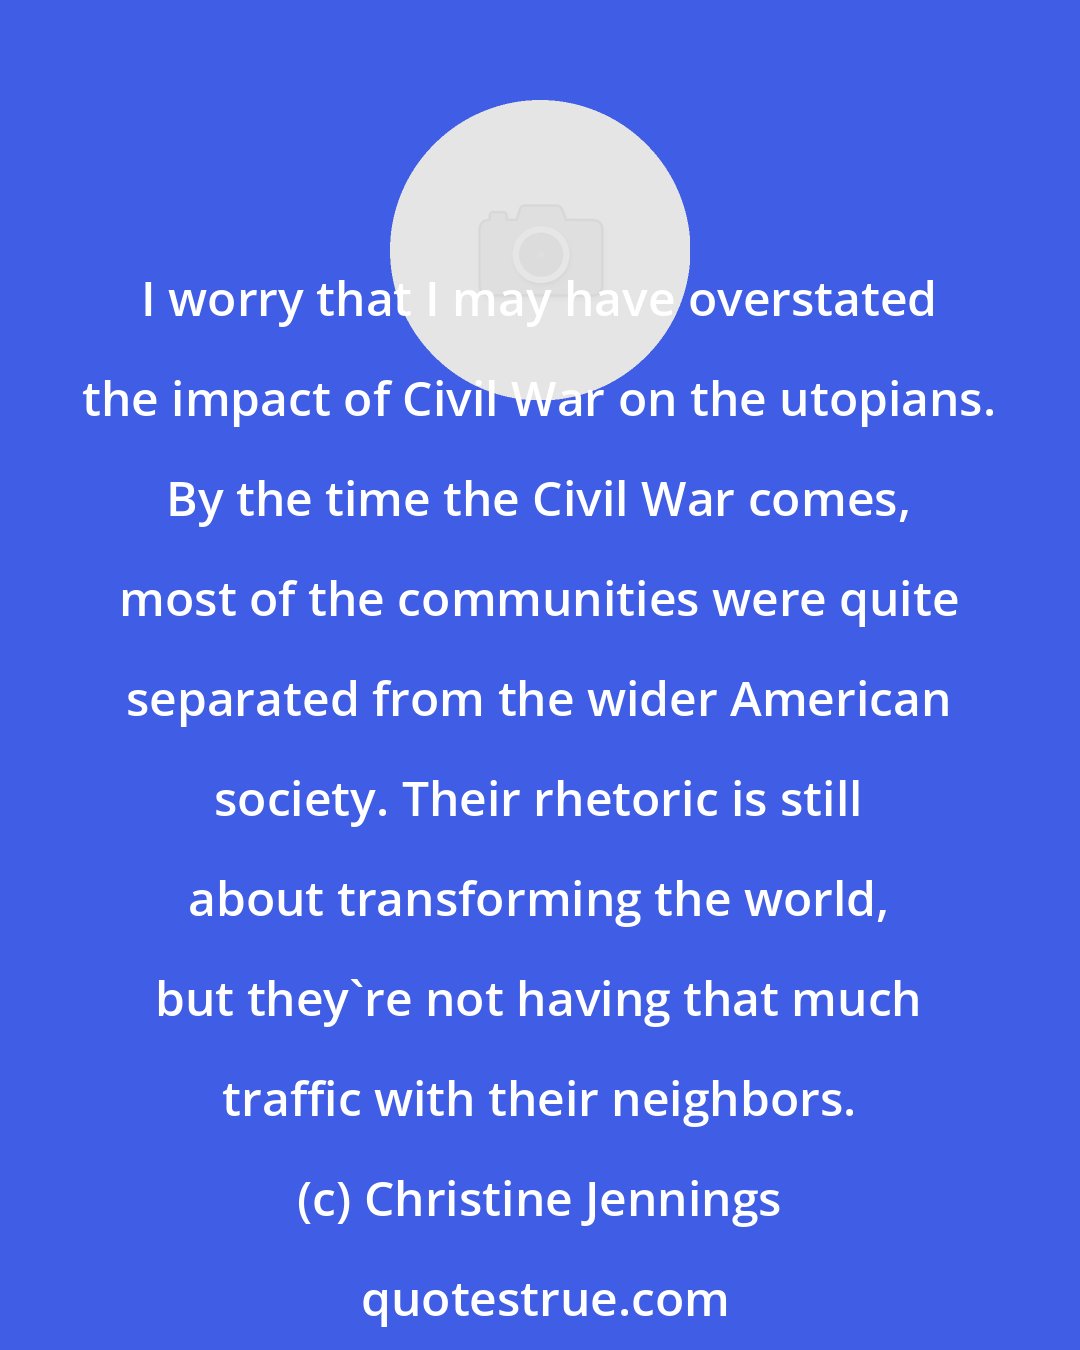 Christine Jennings: I worry that I may have overstated the impact of Civil War on the utopians. By the time the Civil War comes, most of the communities were quite separated from the wider American society. Their rhetoric is still about transforming the world, but they're not having that much traffic with their neighbors.